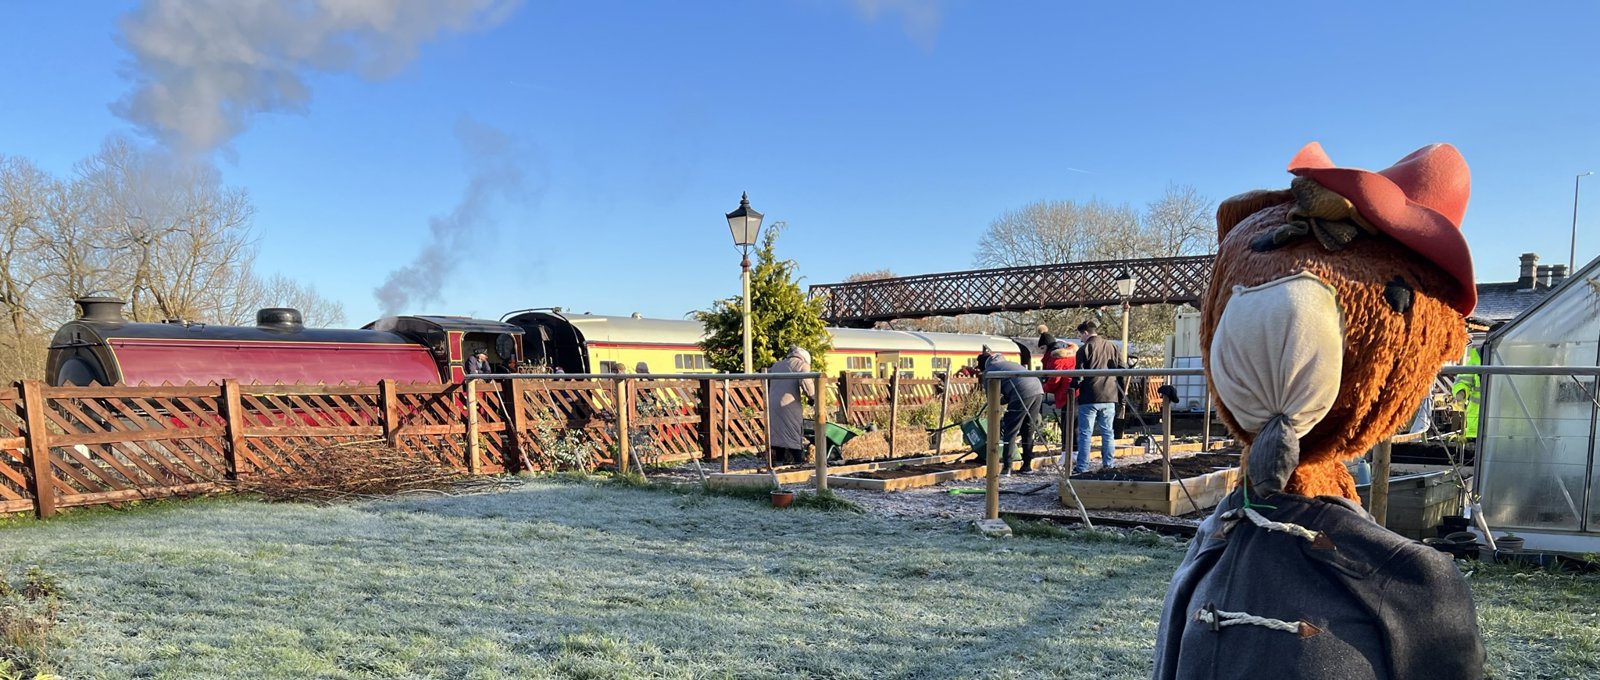 outdoors photo taken on a frosty day. In the foreground is a large teddy bear like a scarecrow. In the background is a steam train